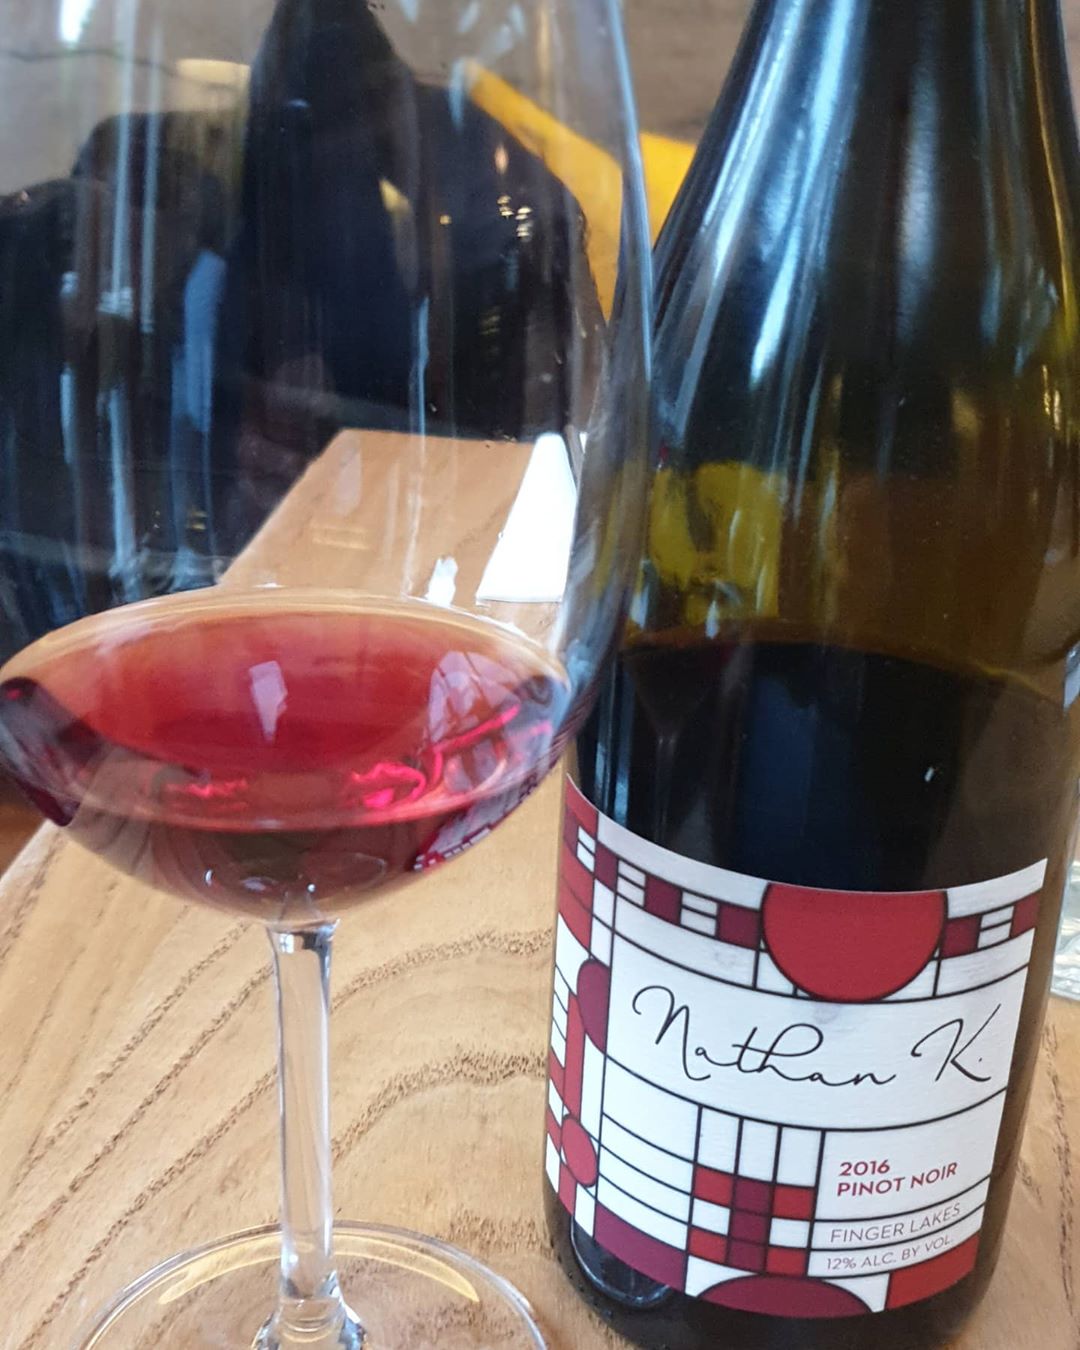 This weekend we’ve been loving Nathan Kendall’s Pinot Noir from Finger Lakes, New York – swing by and grab a bottle.
@visitbath
@bathrestaurants #corkagebath #wine #batheats #independentbath